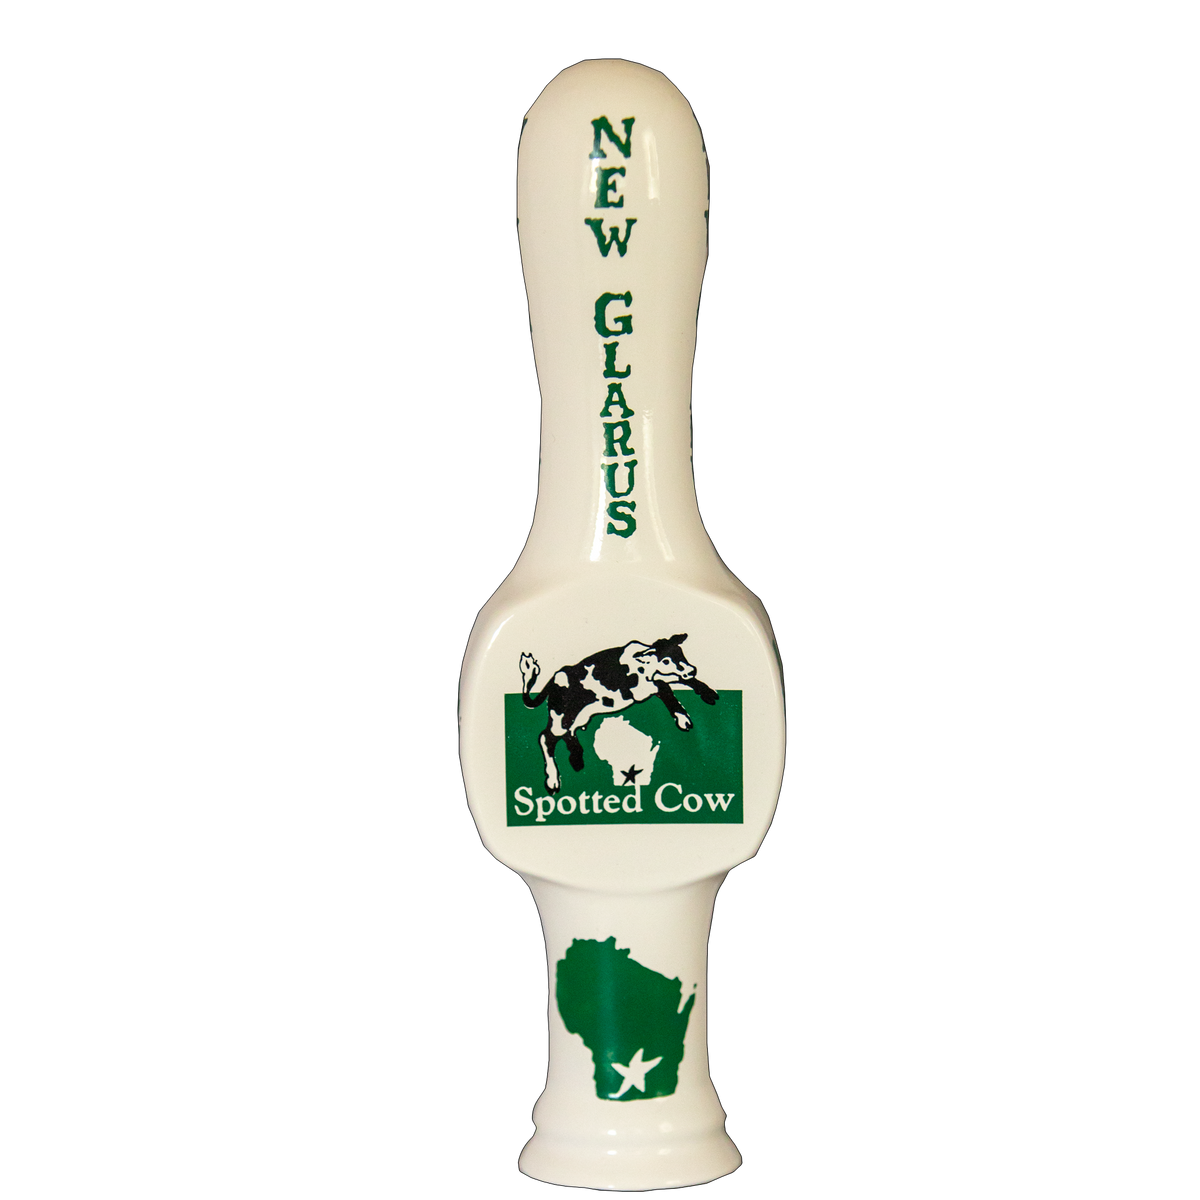 White tap handle with New Glarus written vertically at the top and the Spotted Cow logo in green and black on both sides.